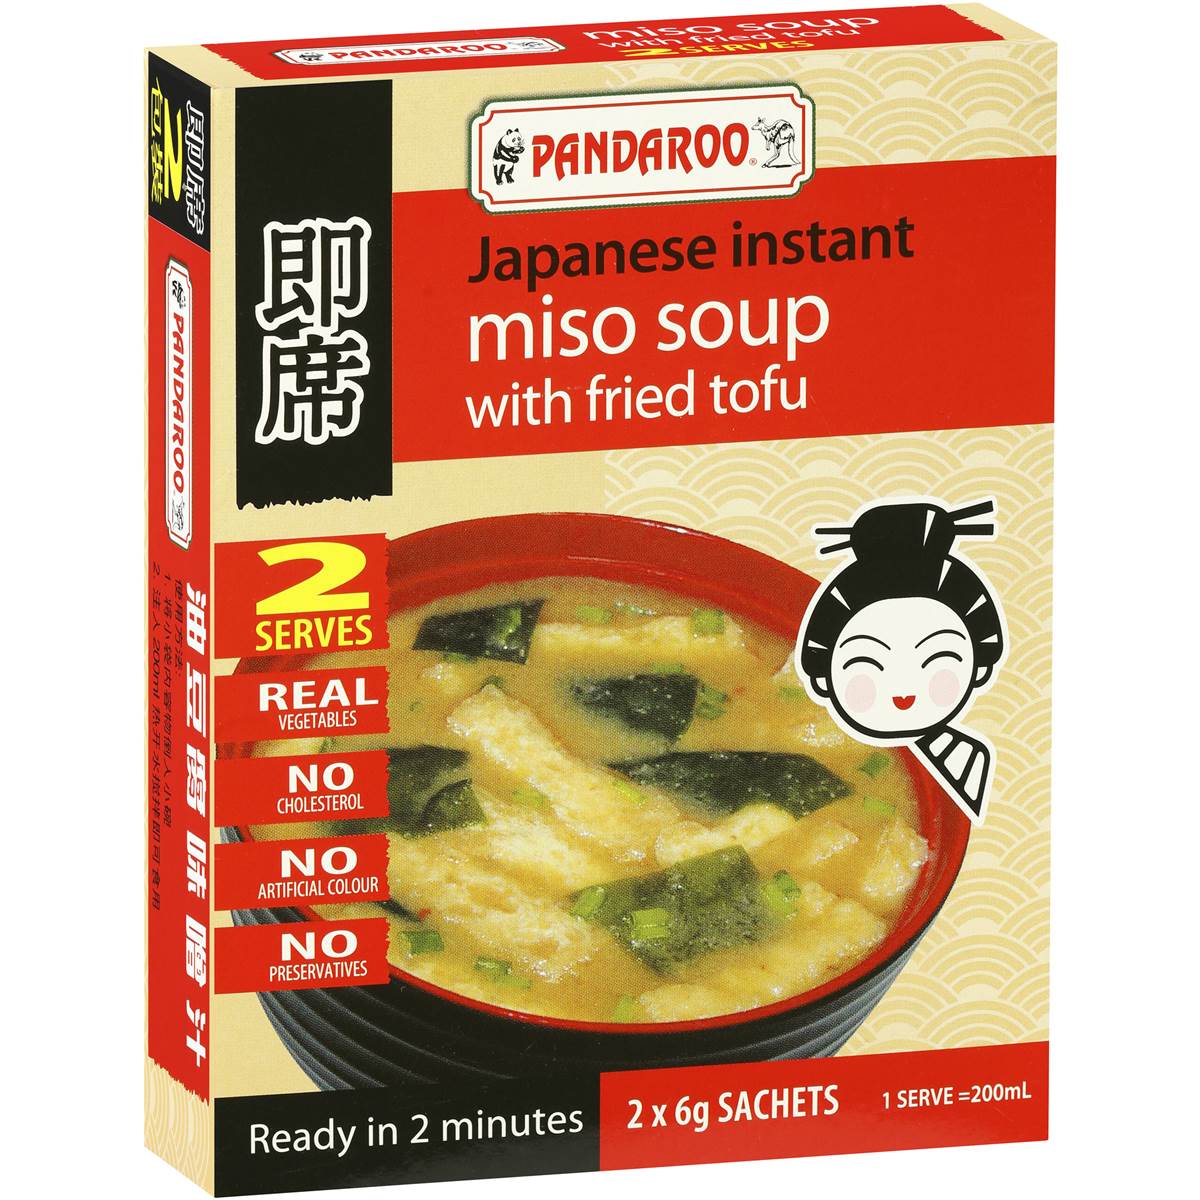 Calories in Pandaroo Japanese Instant Miso Soup Fried Tofu